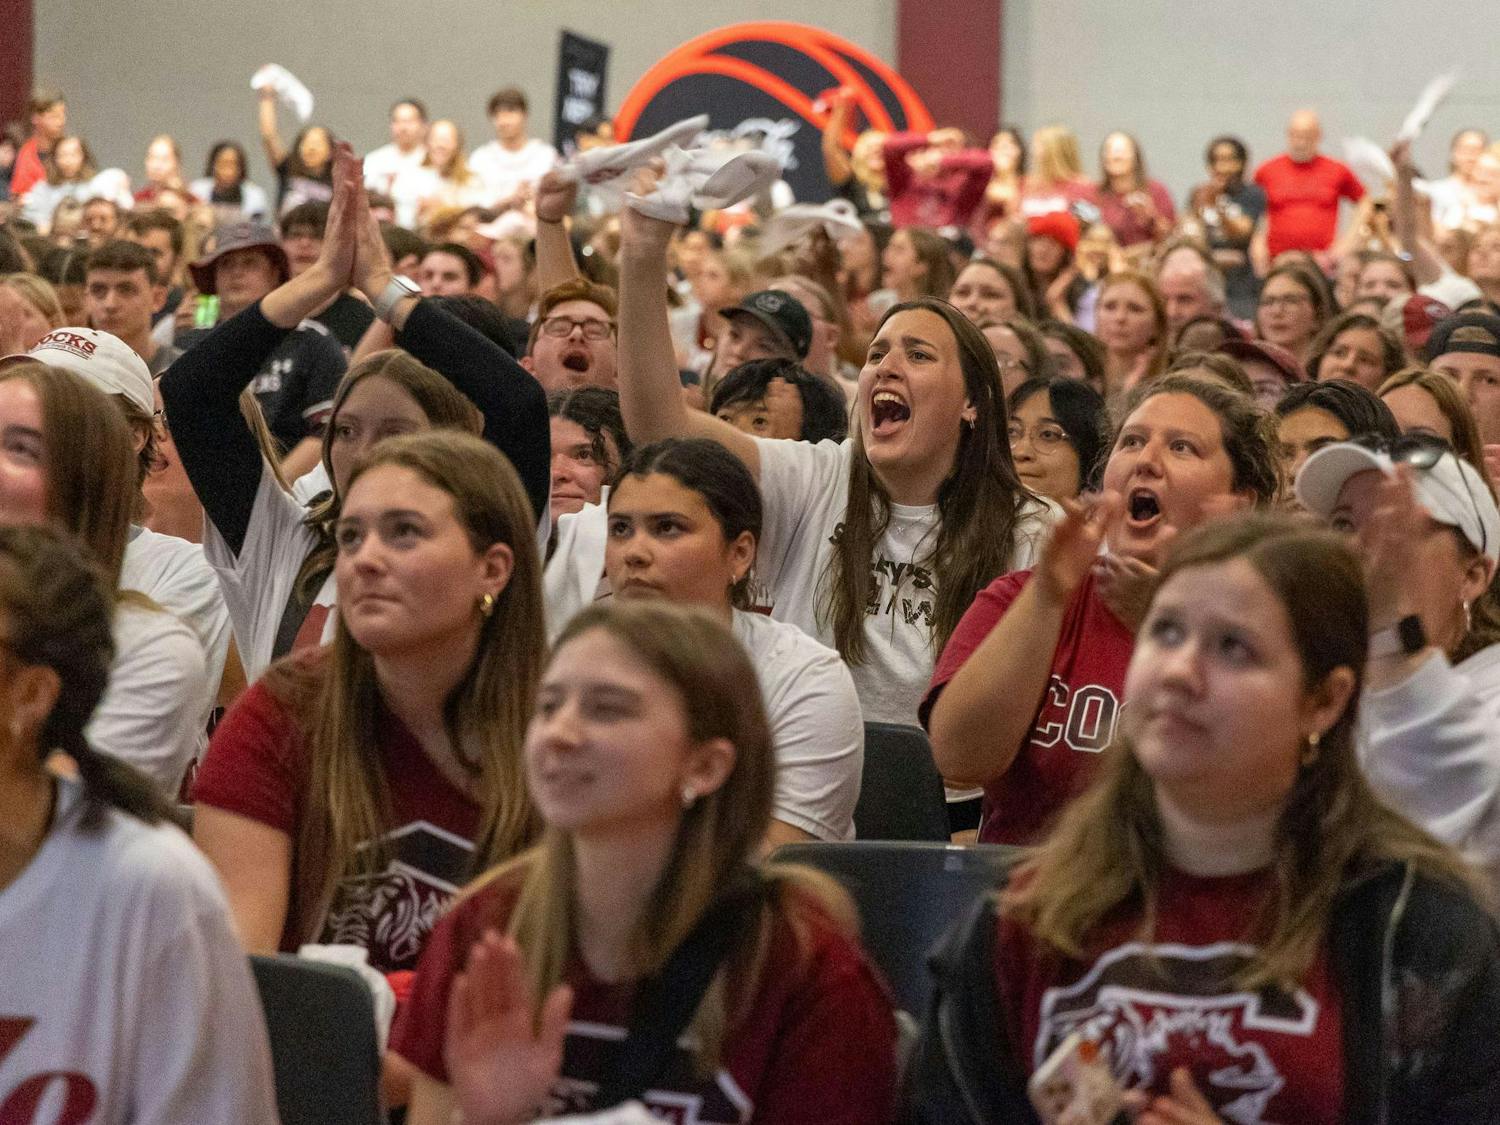 University of South Carolina students gather in the Russell House Student Union to cheer on the Gamecock women's basketball team during the final round of the NCAA Women's Tournament against Iowa on April 7, 2024. The Gamecocks claimed its third national title since 2017 with an 87-75 victory over the Hawkeyes.